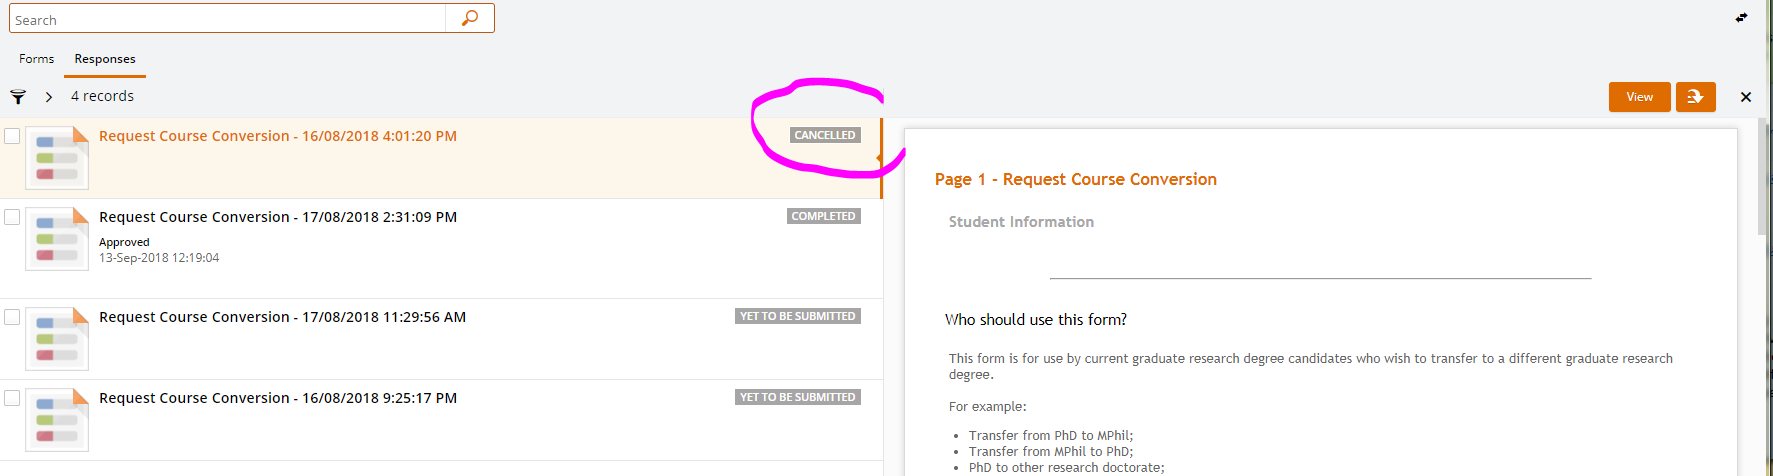 StudentOne screenshot with Cancelled status circled